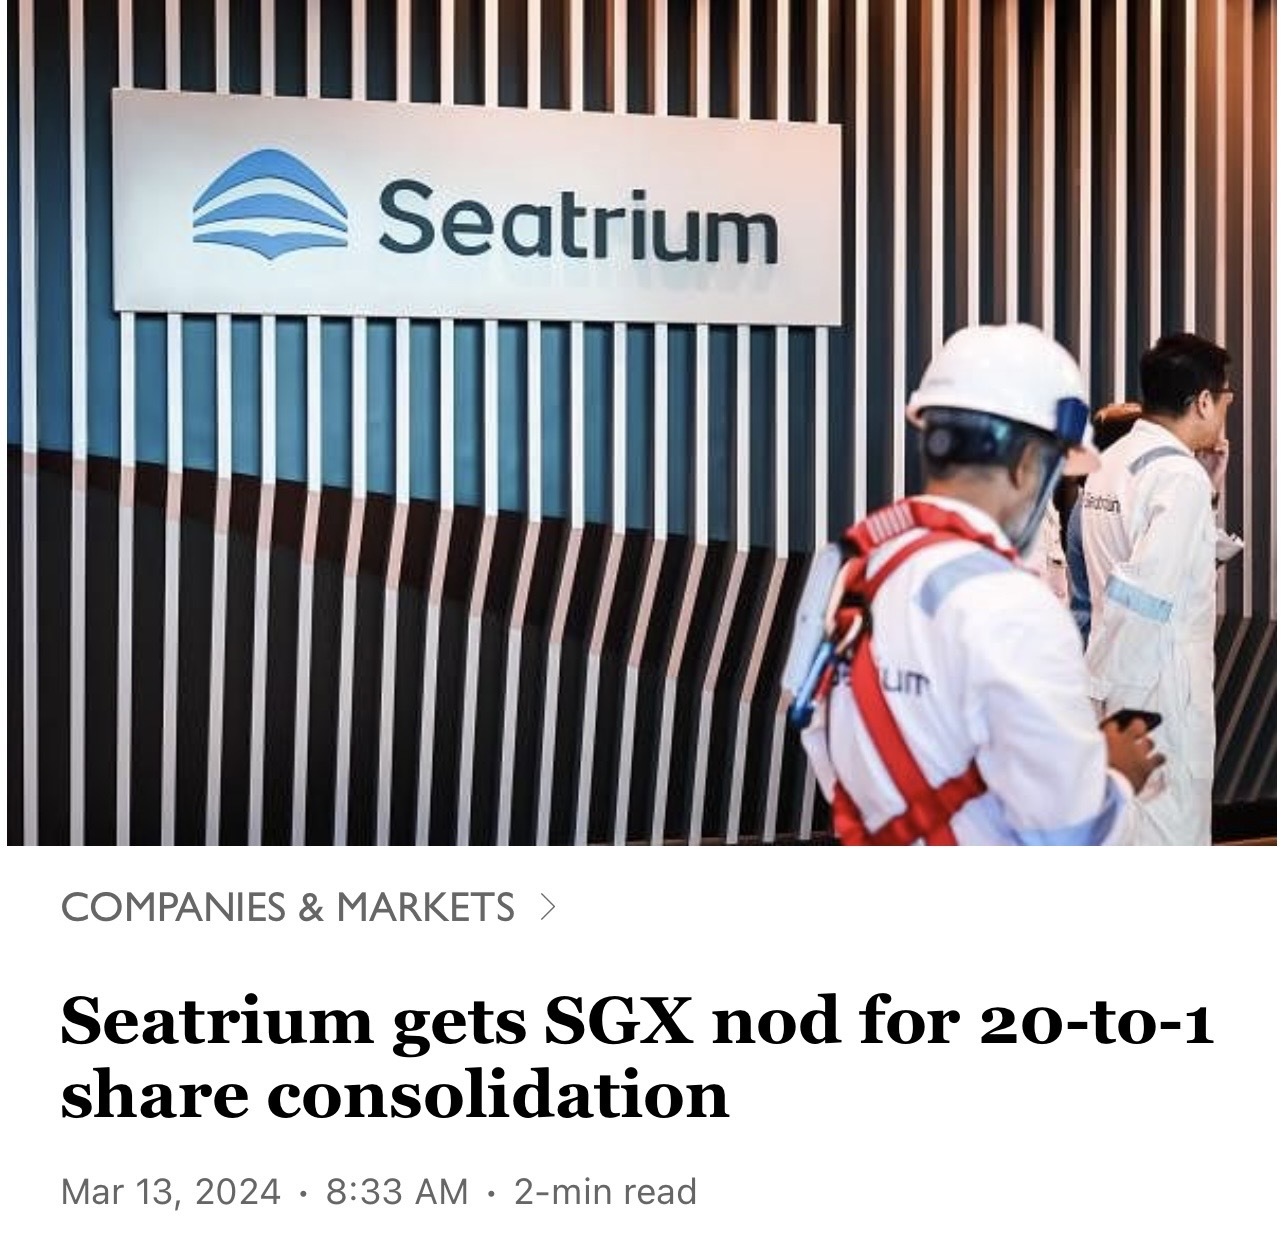 $Seatrium (S51.SG)$ well this could be days old news but maybe impacted the stock price?